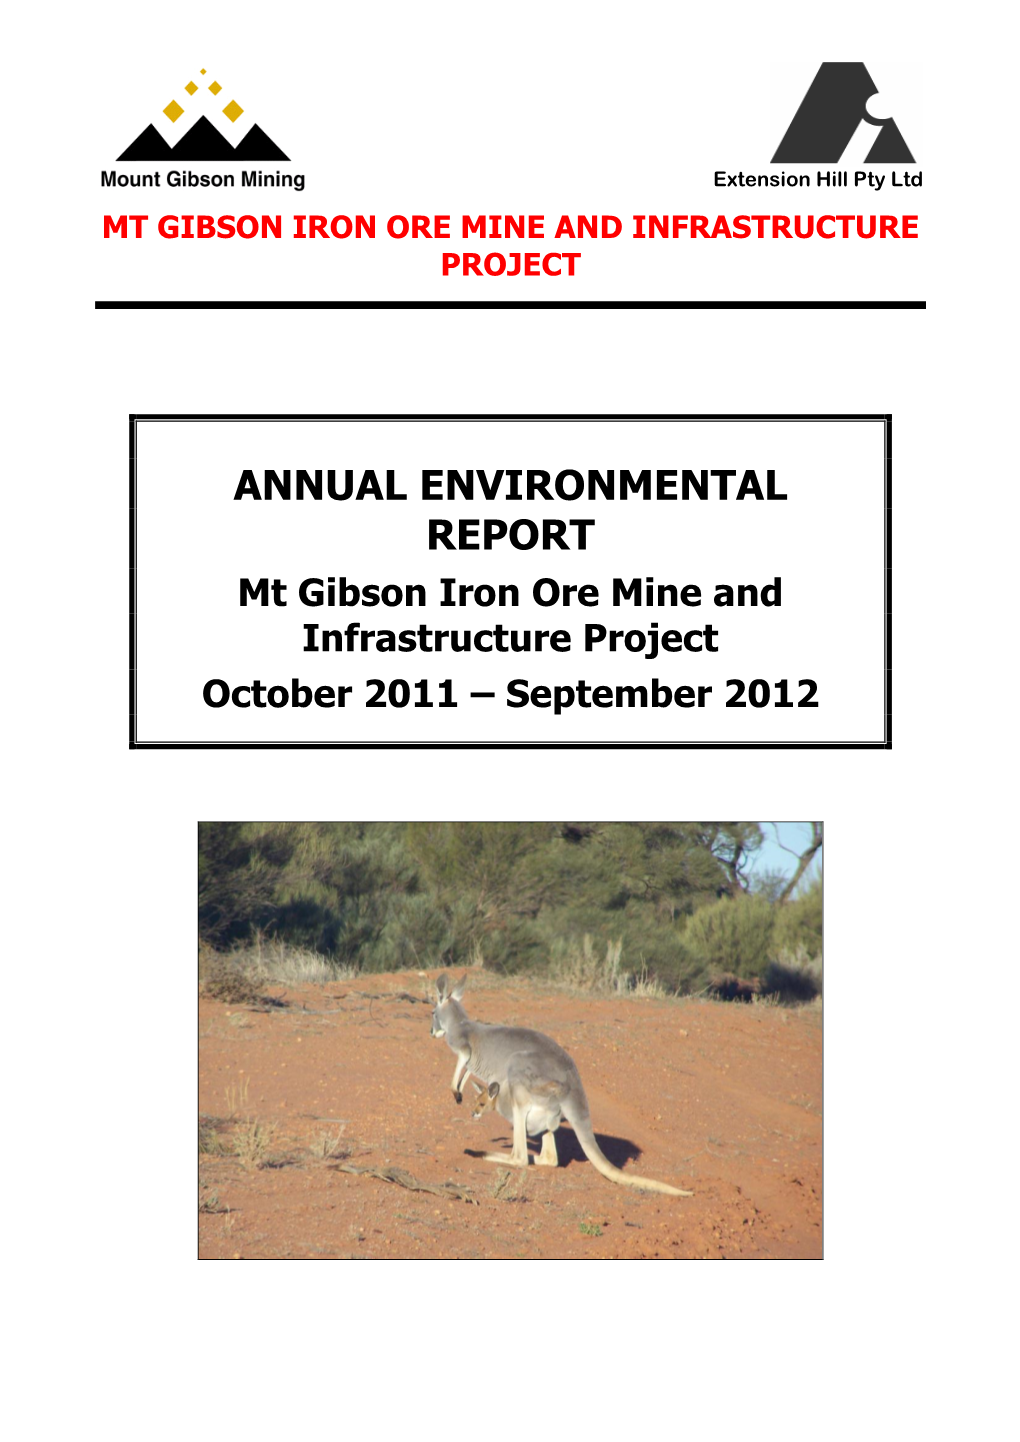 Mount Gibson Iron Ore Mine & Infrastructure Project 2012